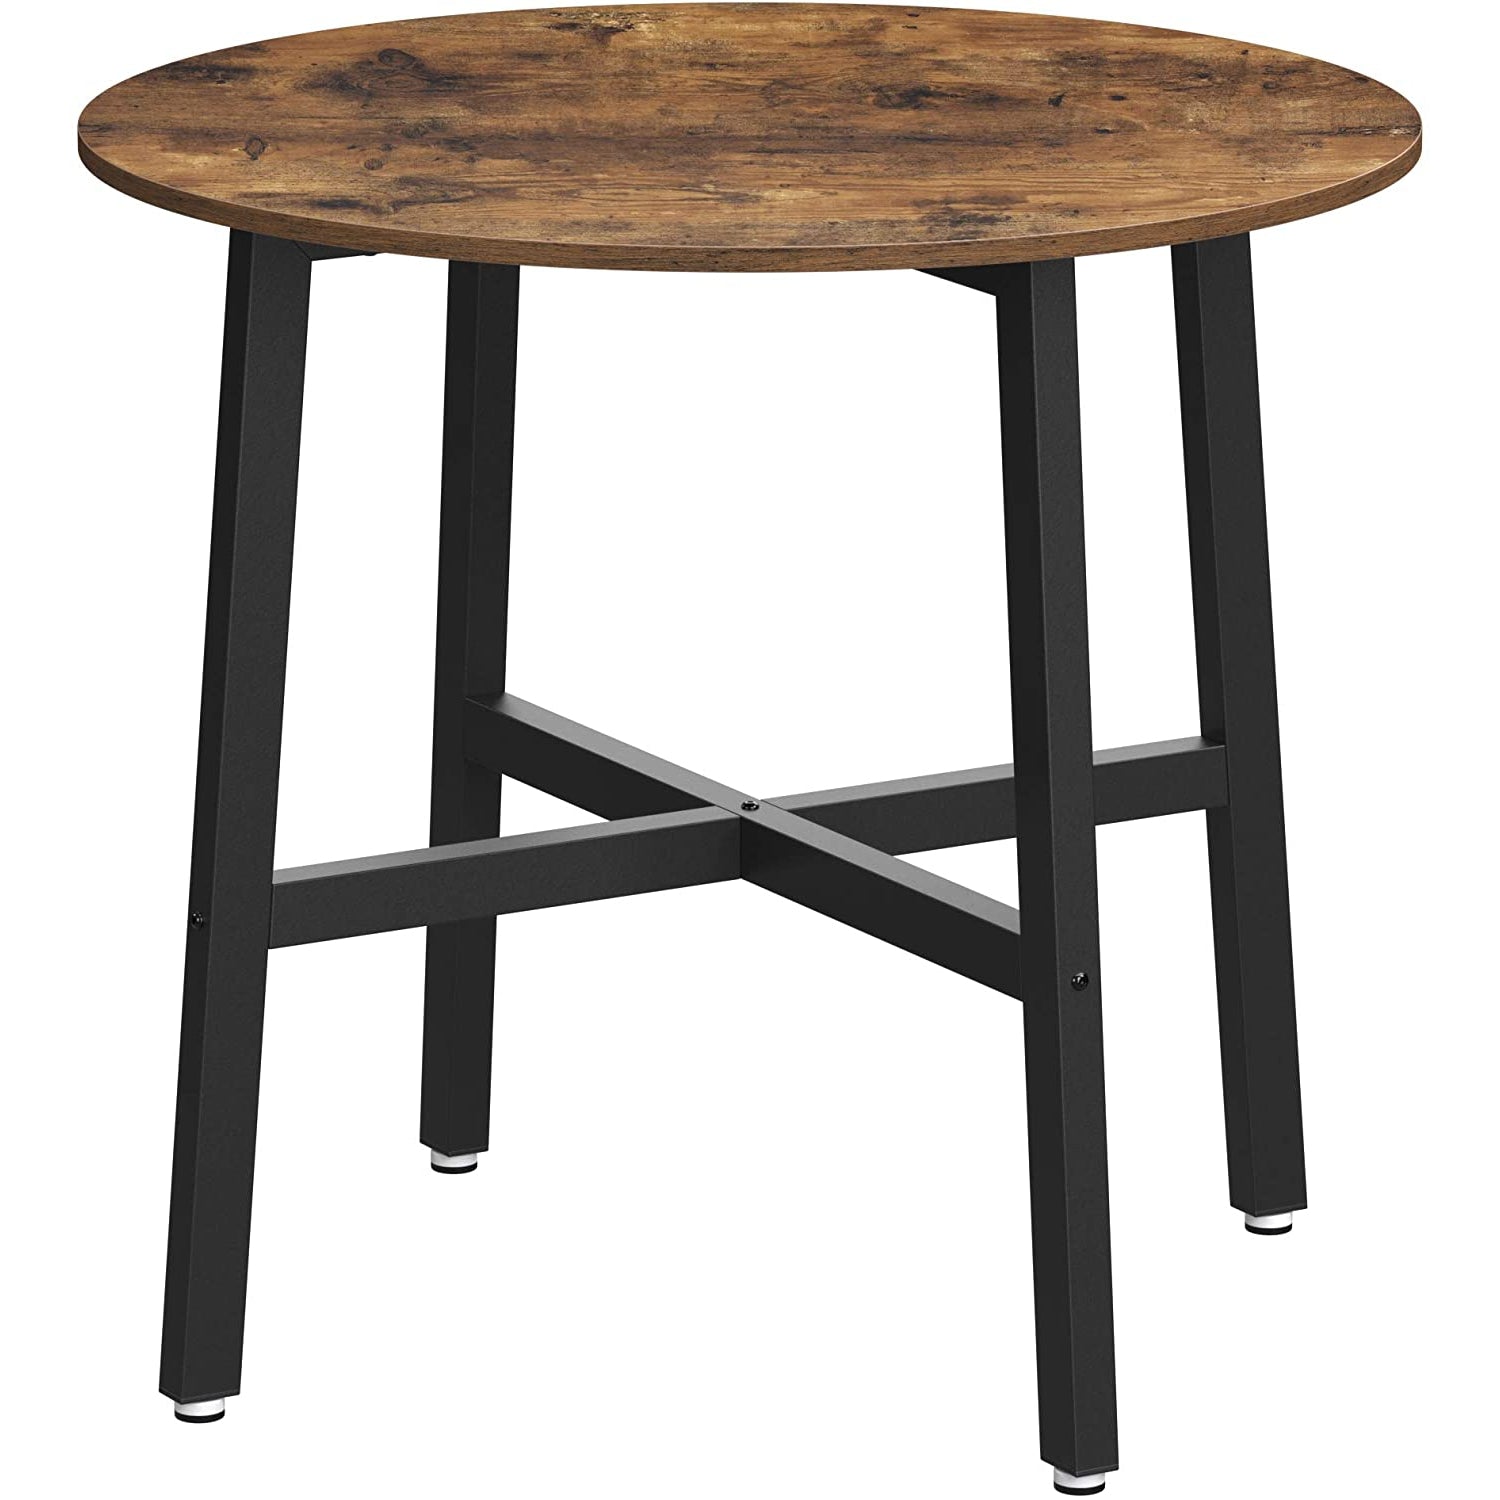 Nancy's Sparks Small dining table - Kitchen table - Industrial - 80 x 80 x 75 cm